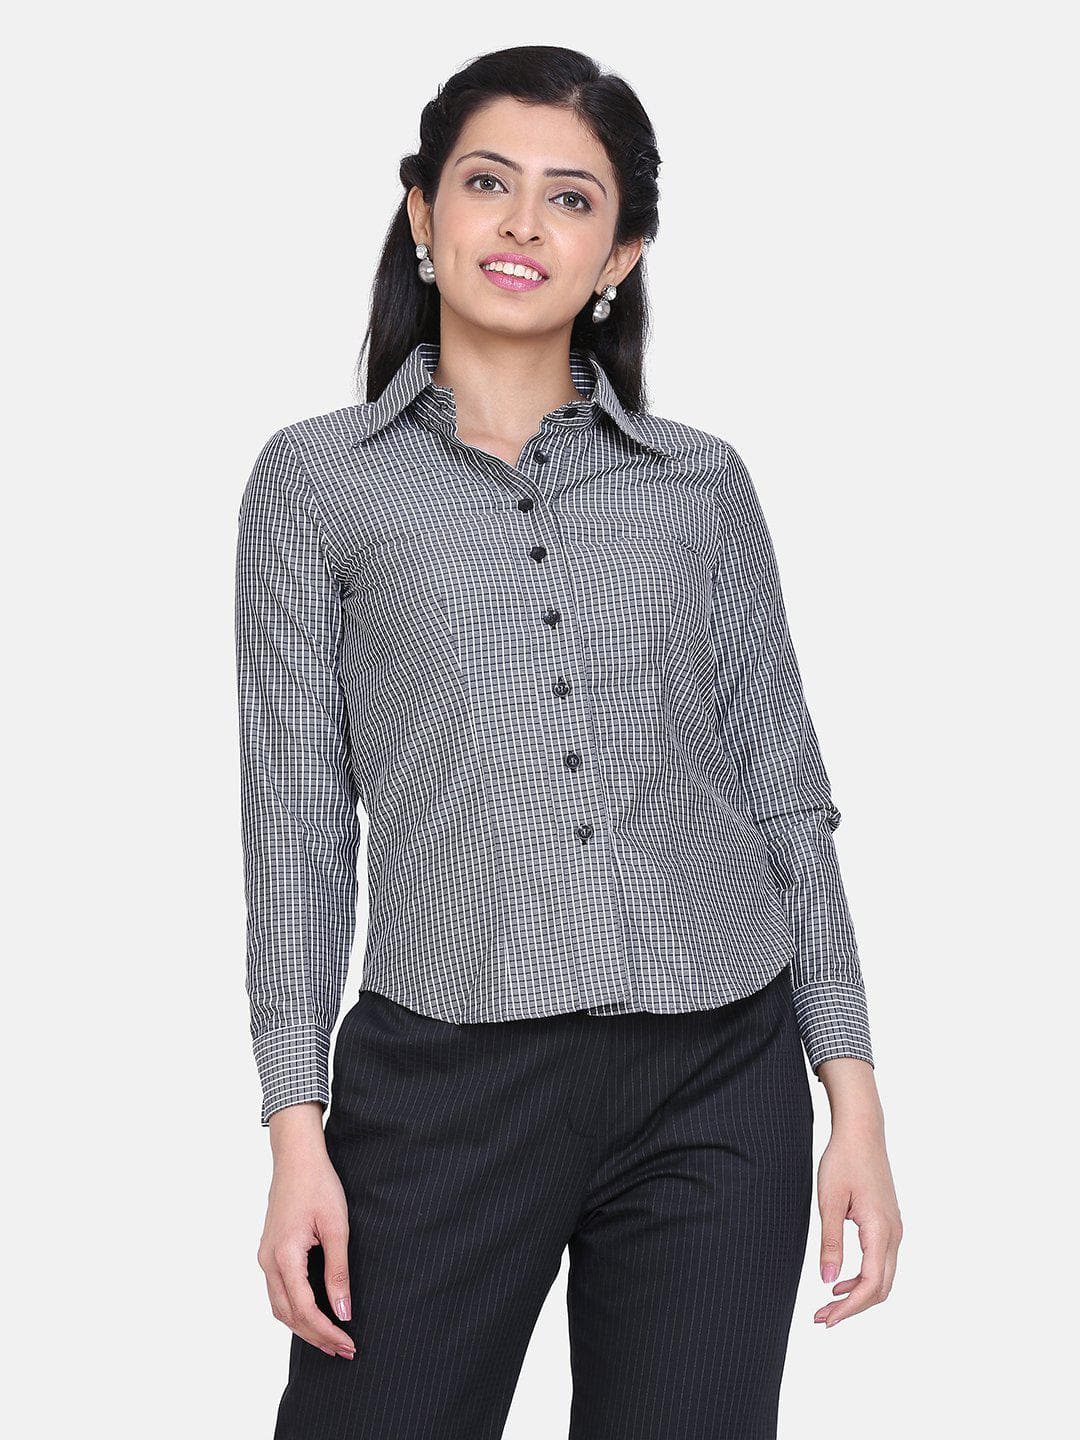 Check Collared Cotton Top For Women - Grey